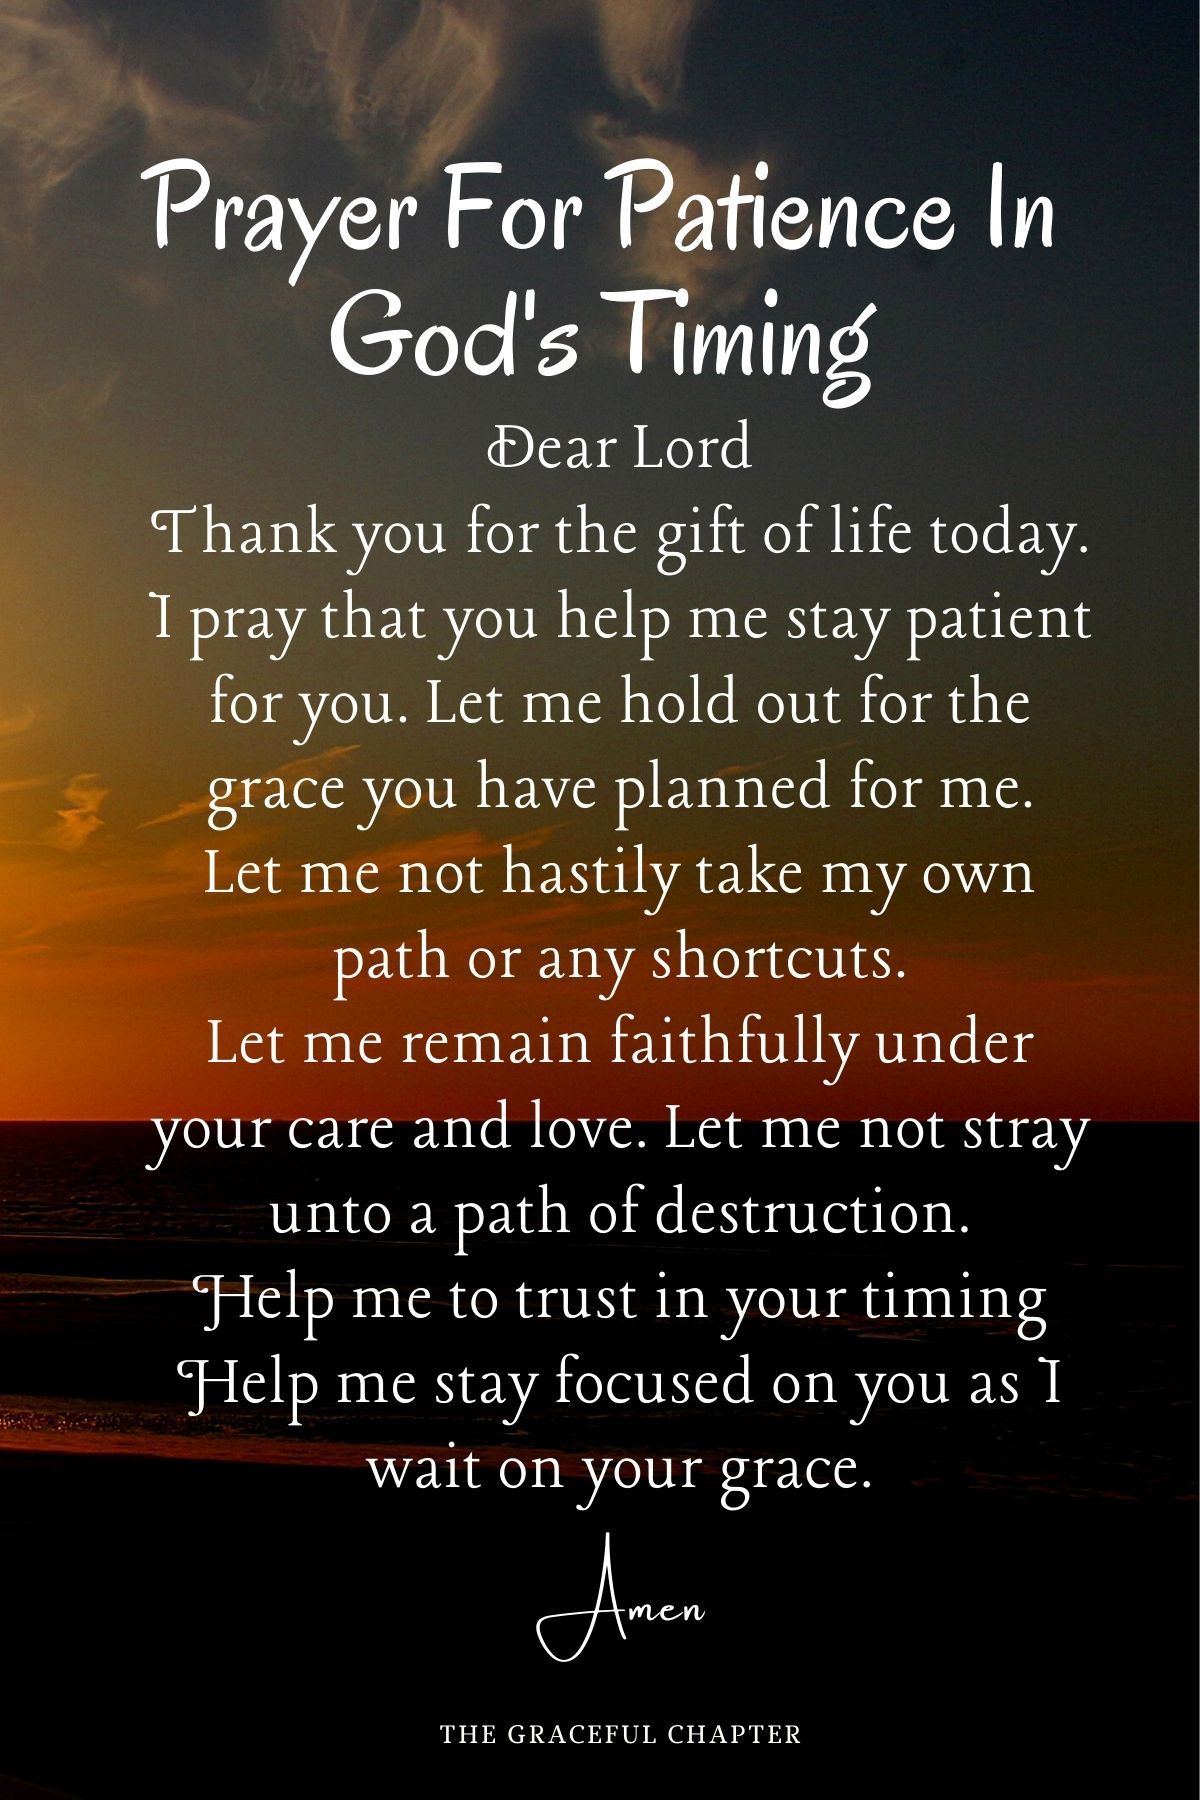 Prayer for patience in God's timing